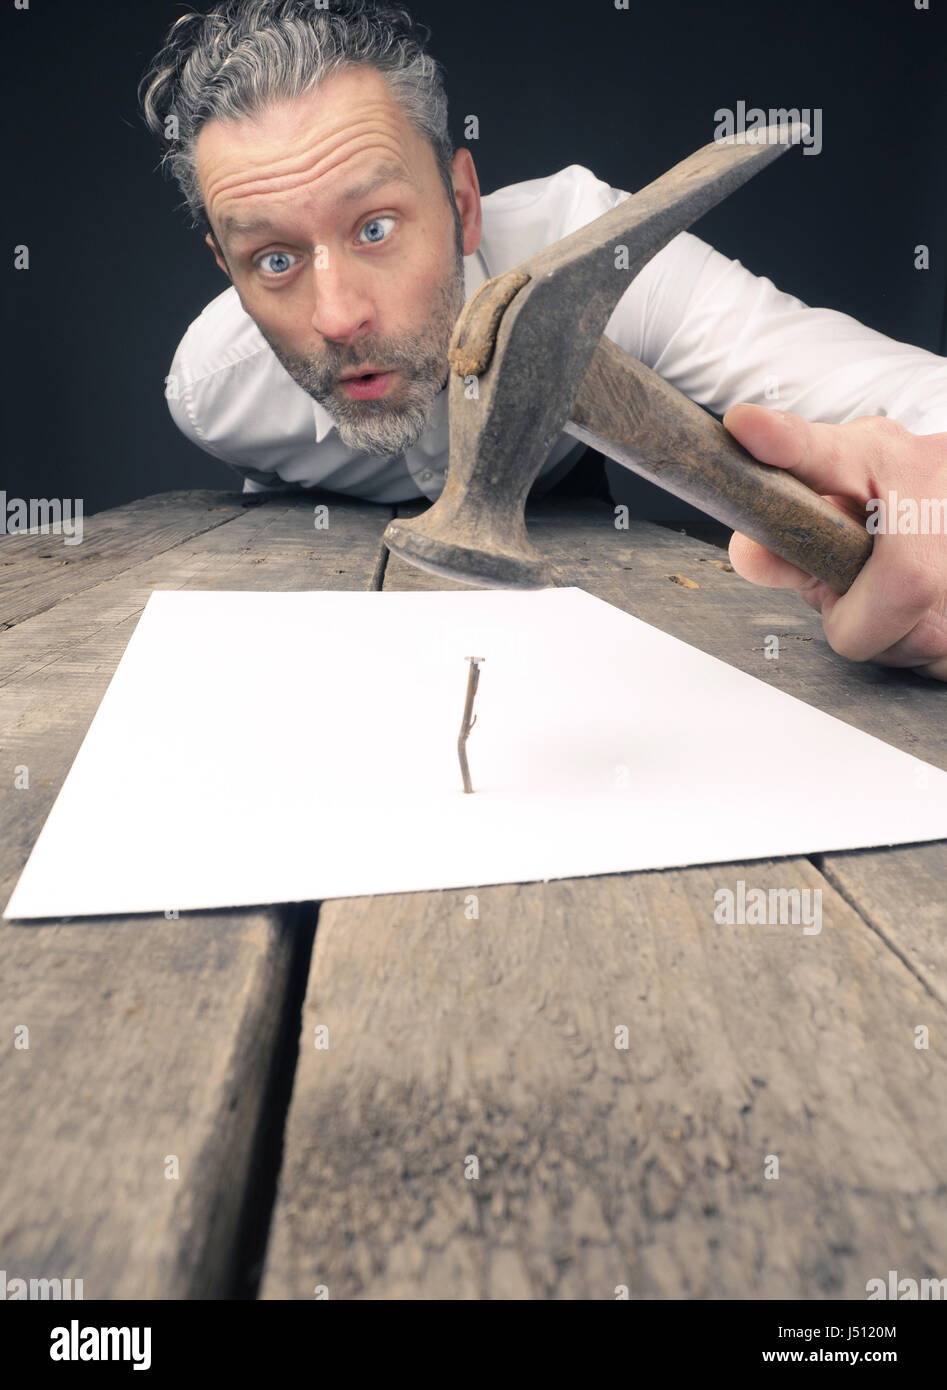 Business concept image with a concluding contract Stock Photo